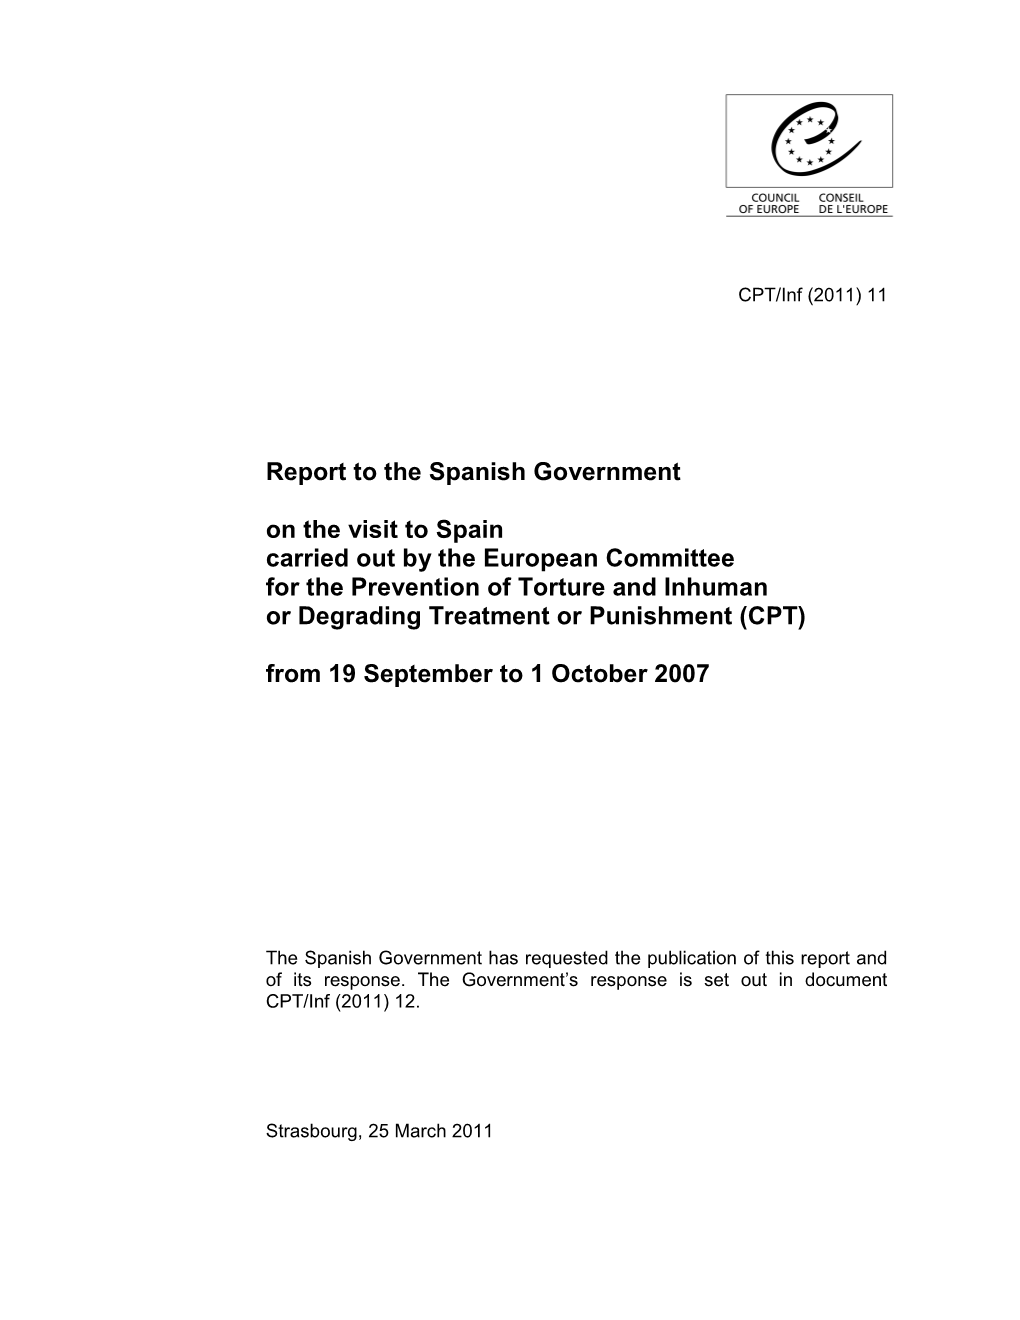 Report to the Spanish Government on the Visit To